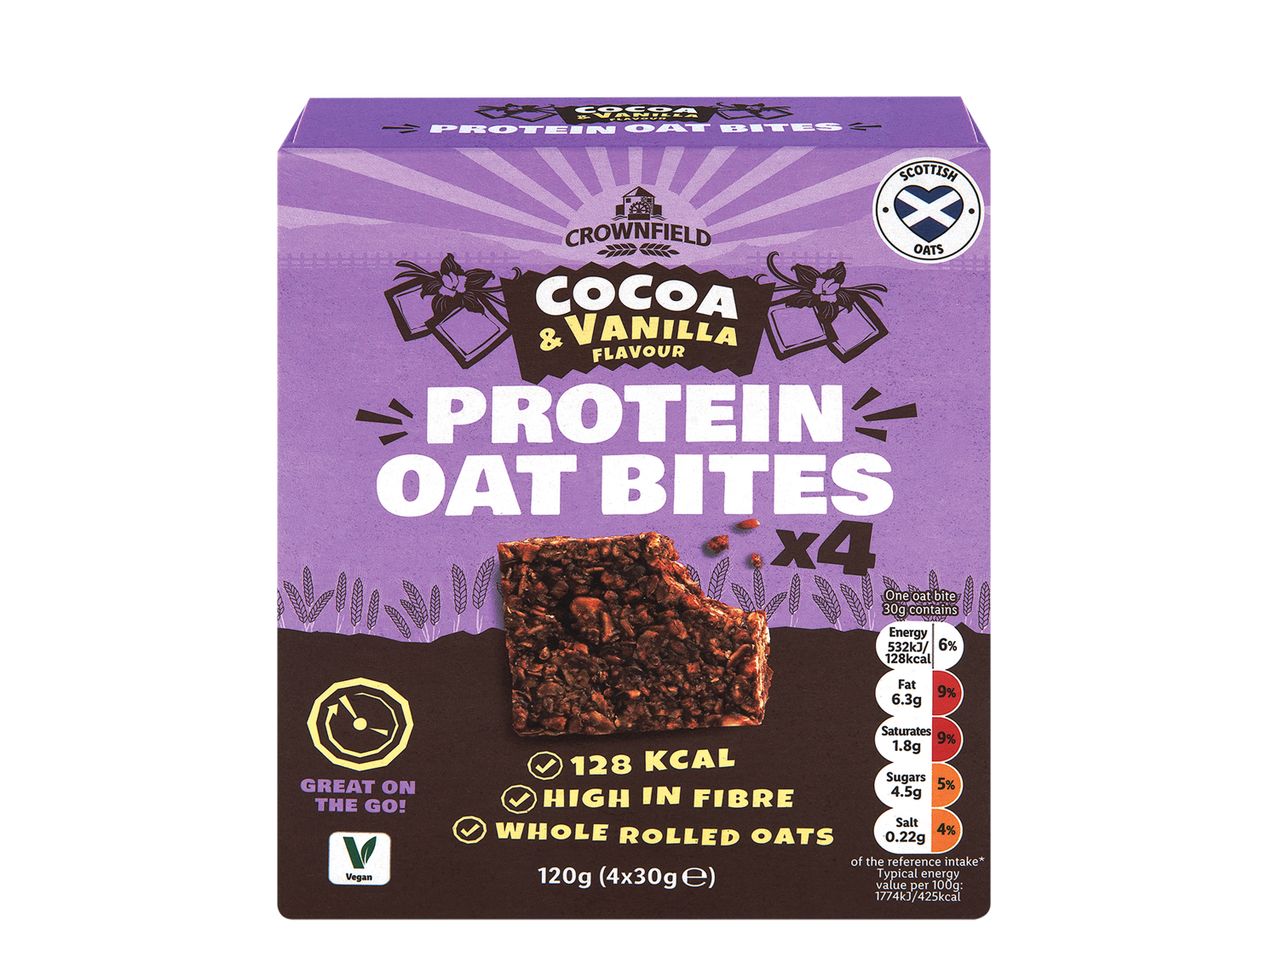 Go to full screen view: Crownfield Cocoa & Vanilla Protein Oat Bites - Image 1